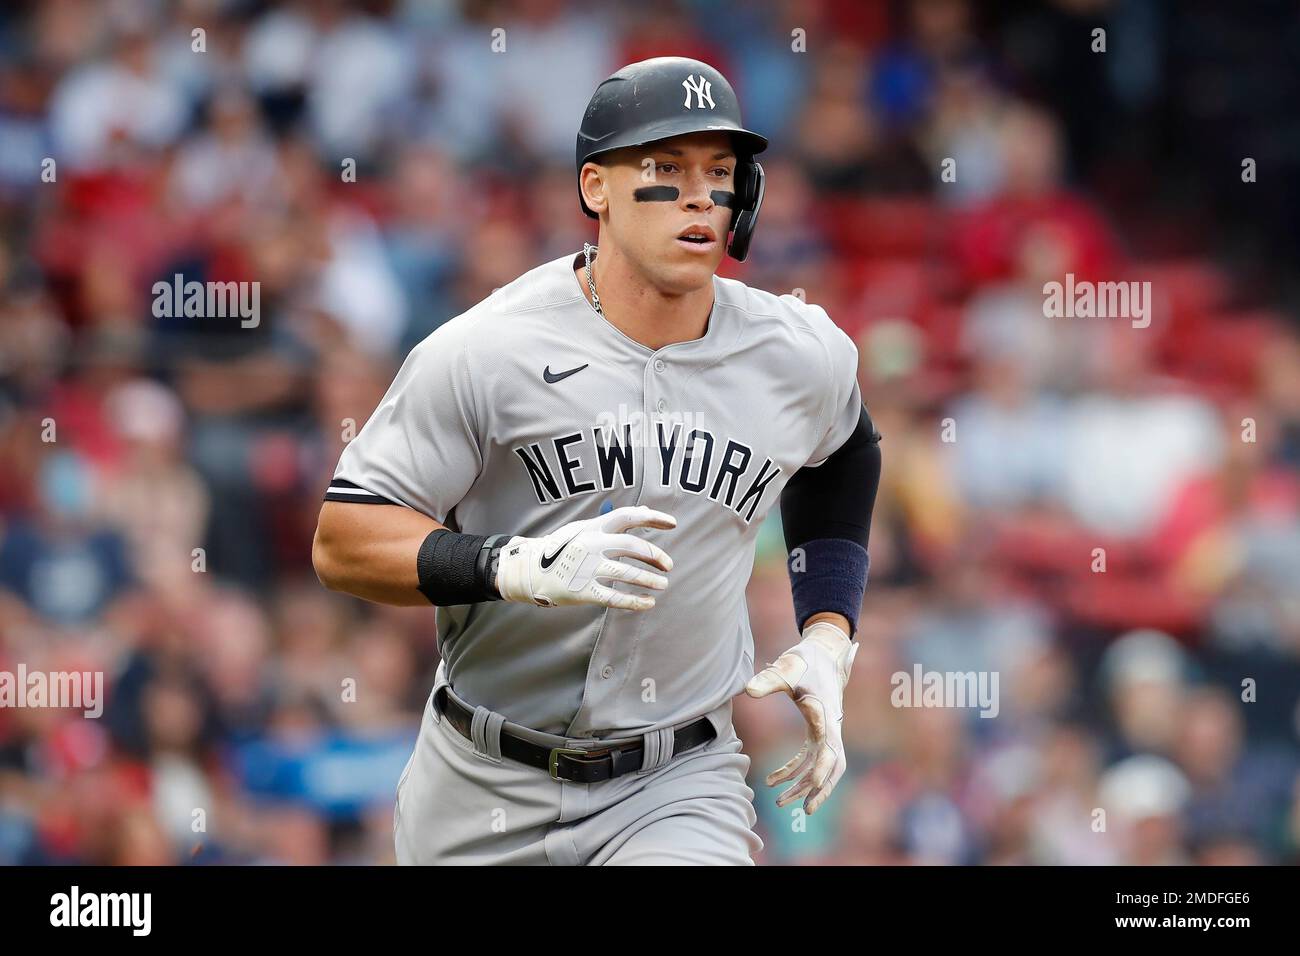 Aaron Judge GOES OFF against the Red Sox! 